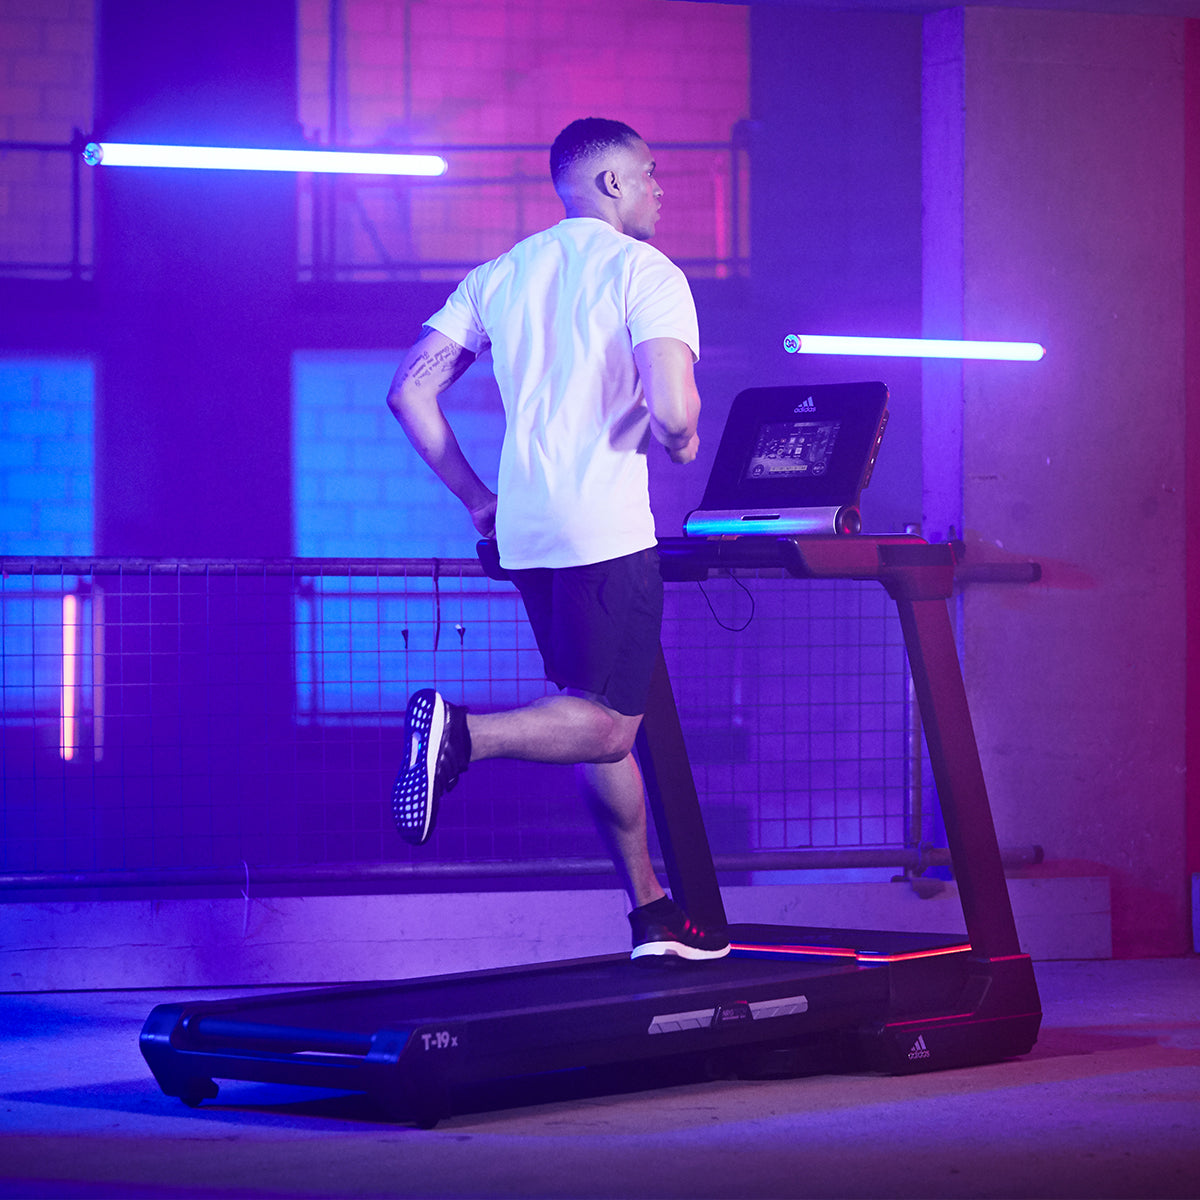 T-19x Treadmill with Zwift and Kinomap